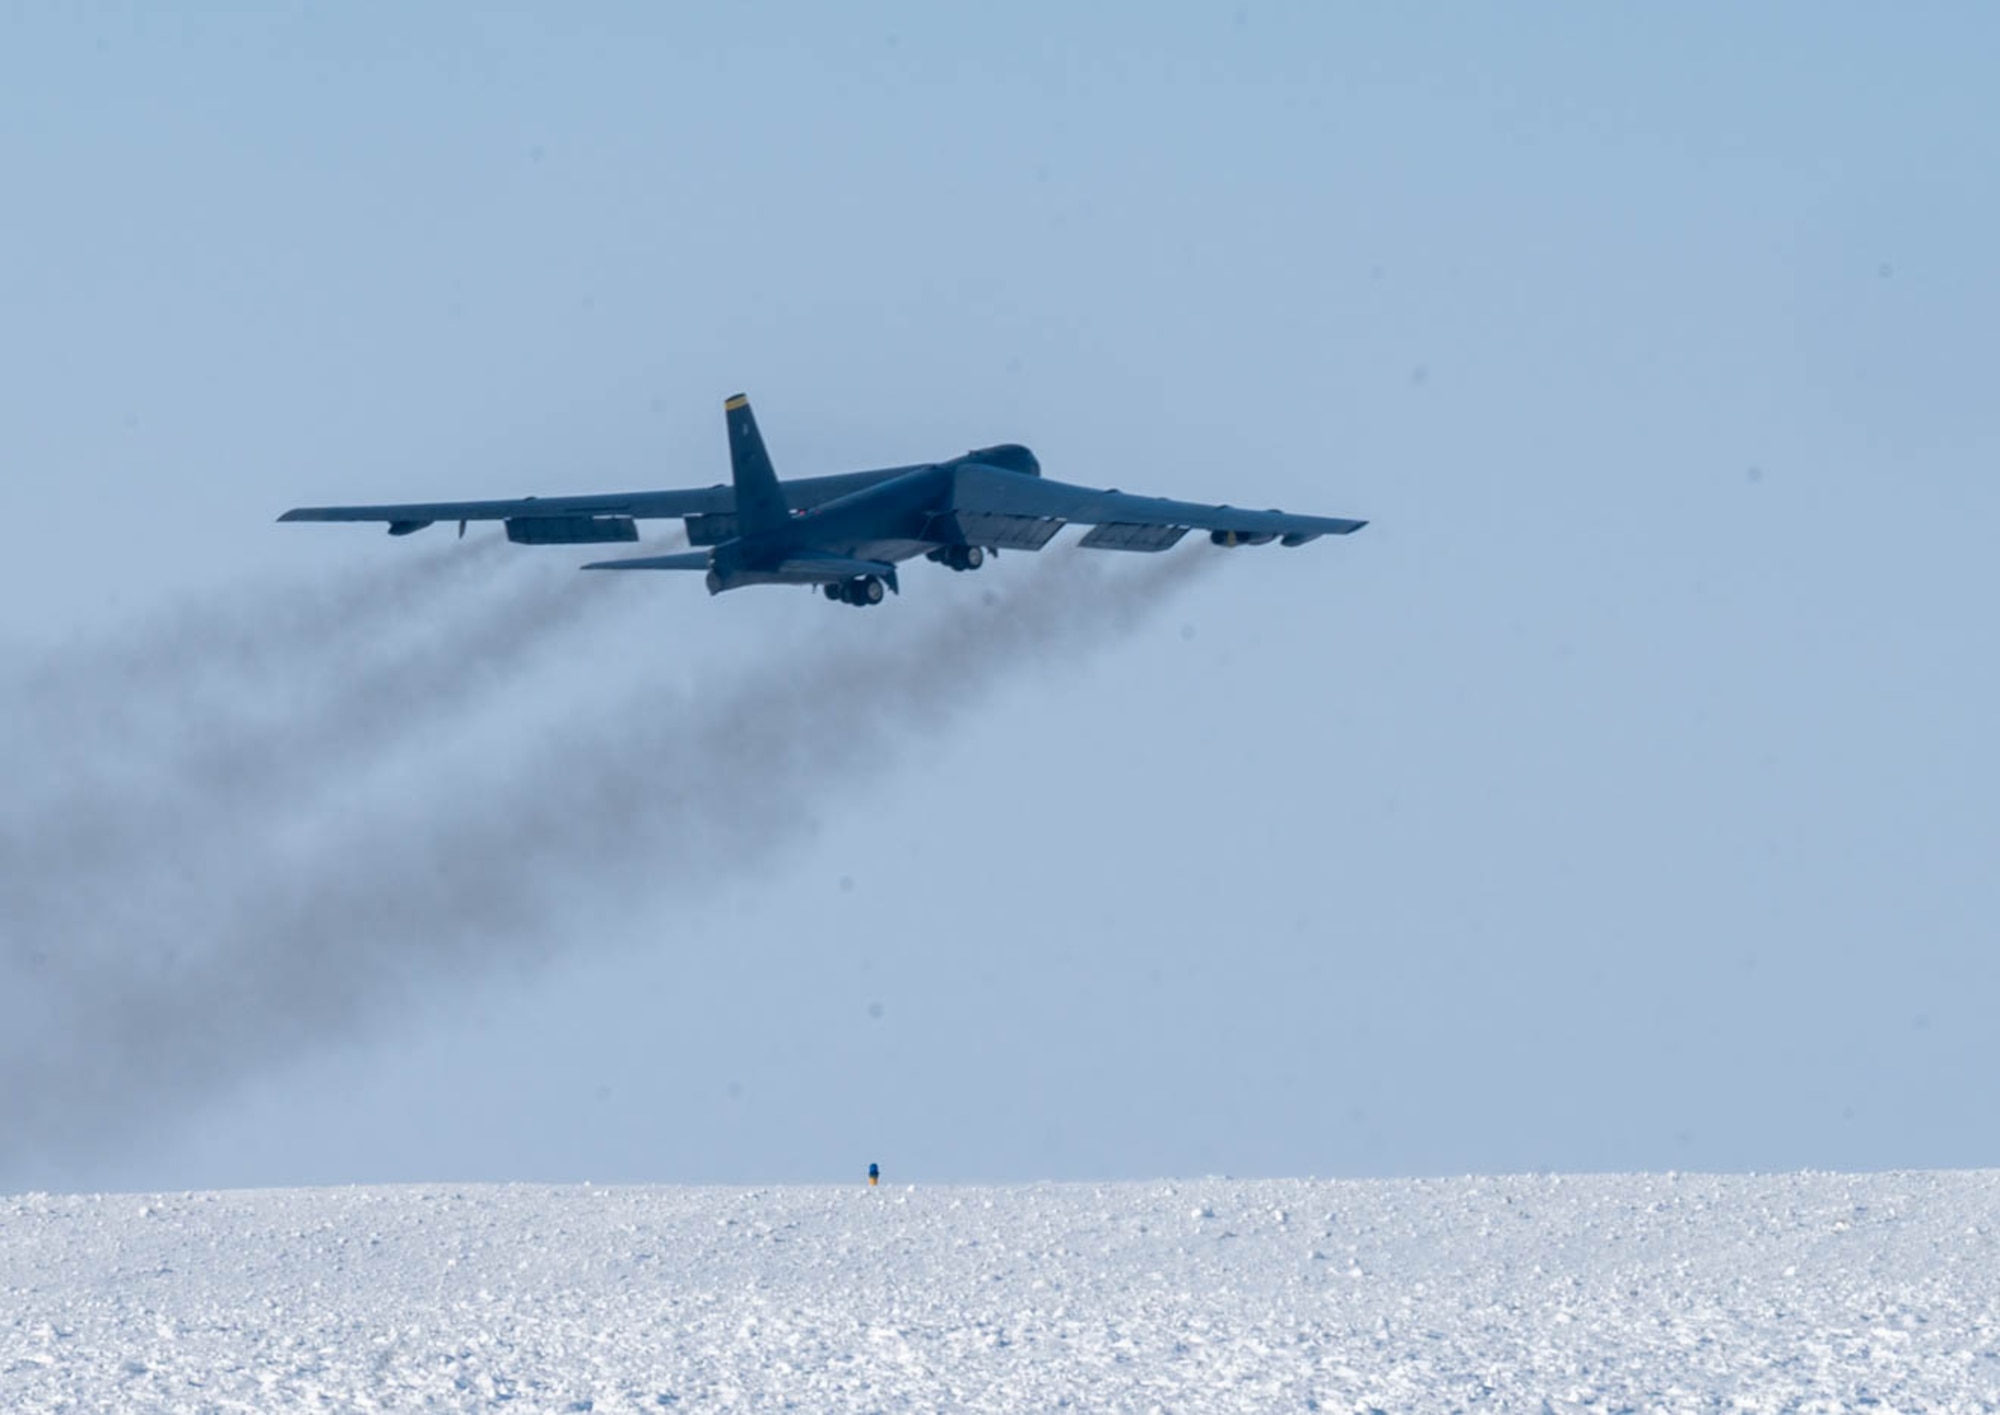 A B-52H Stratofortress, assigned to the 69th Bomb Squadron, takes off during Exercise Prairie Vigilance 24-1 at Minot Air Force Base, North Dakota Oct. 27, 2023. Prairie Vigilance 24-1 enable crews to maintain a high state of readiness and proficiency, and validate the always-ready, global strike capability.  (U.S. Air Force photo by Airman 1st Class Luis Gomez)